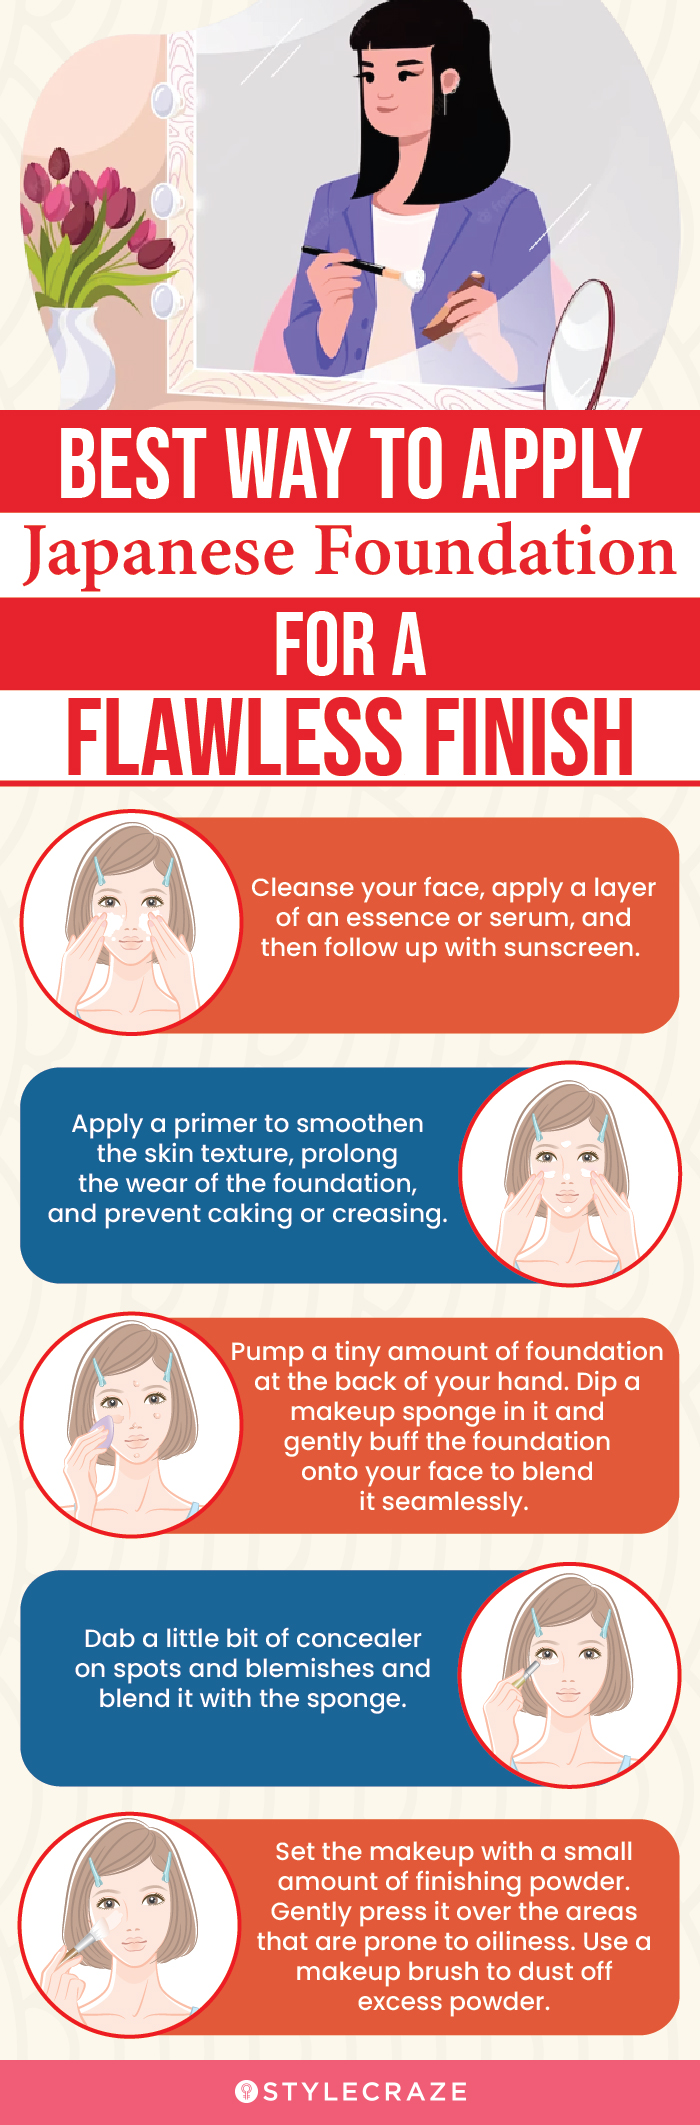 Best Way To Apply Japanese Foundation For A Flawless Finish (infographic)